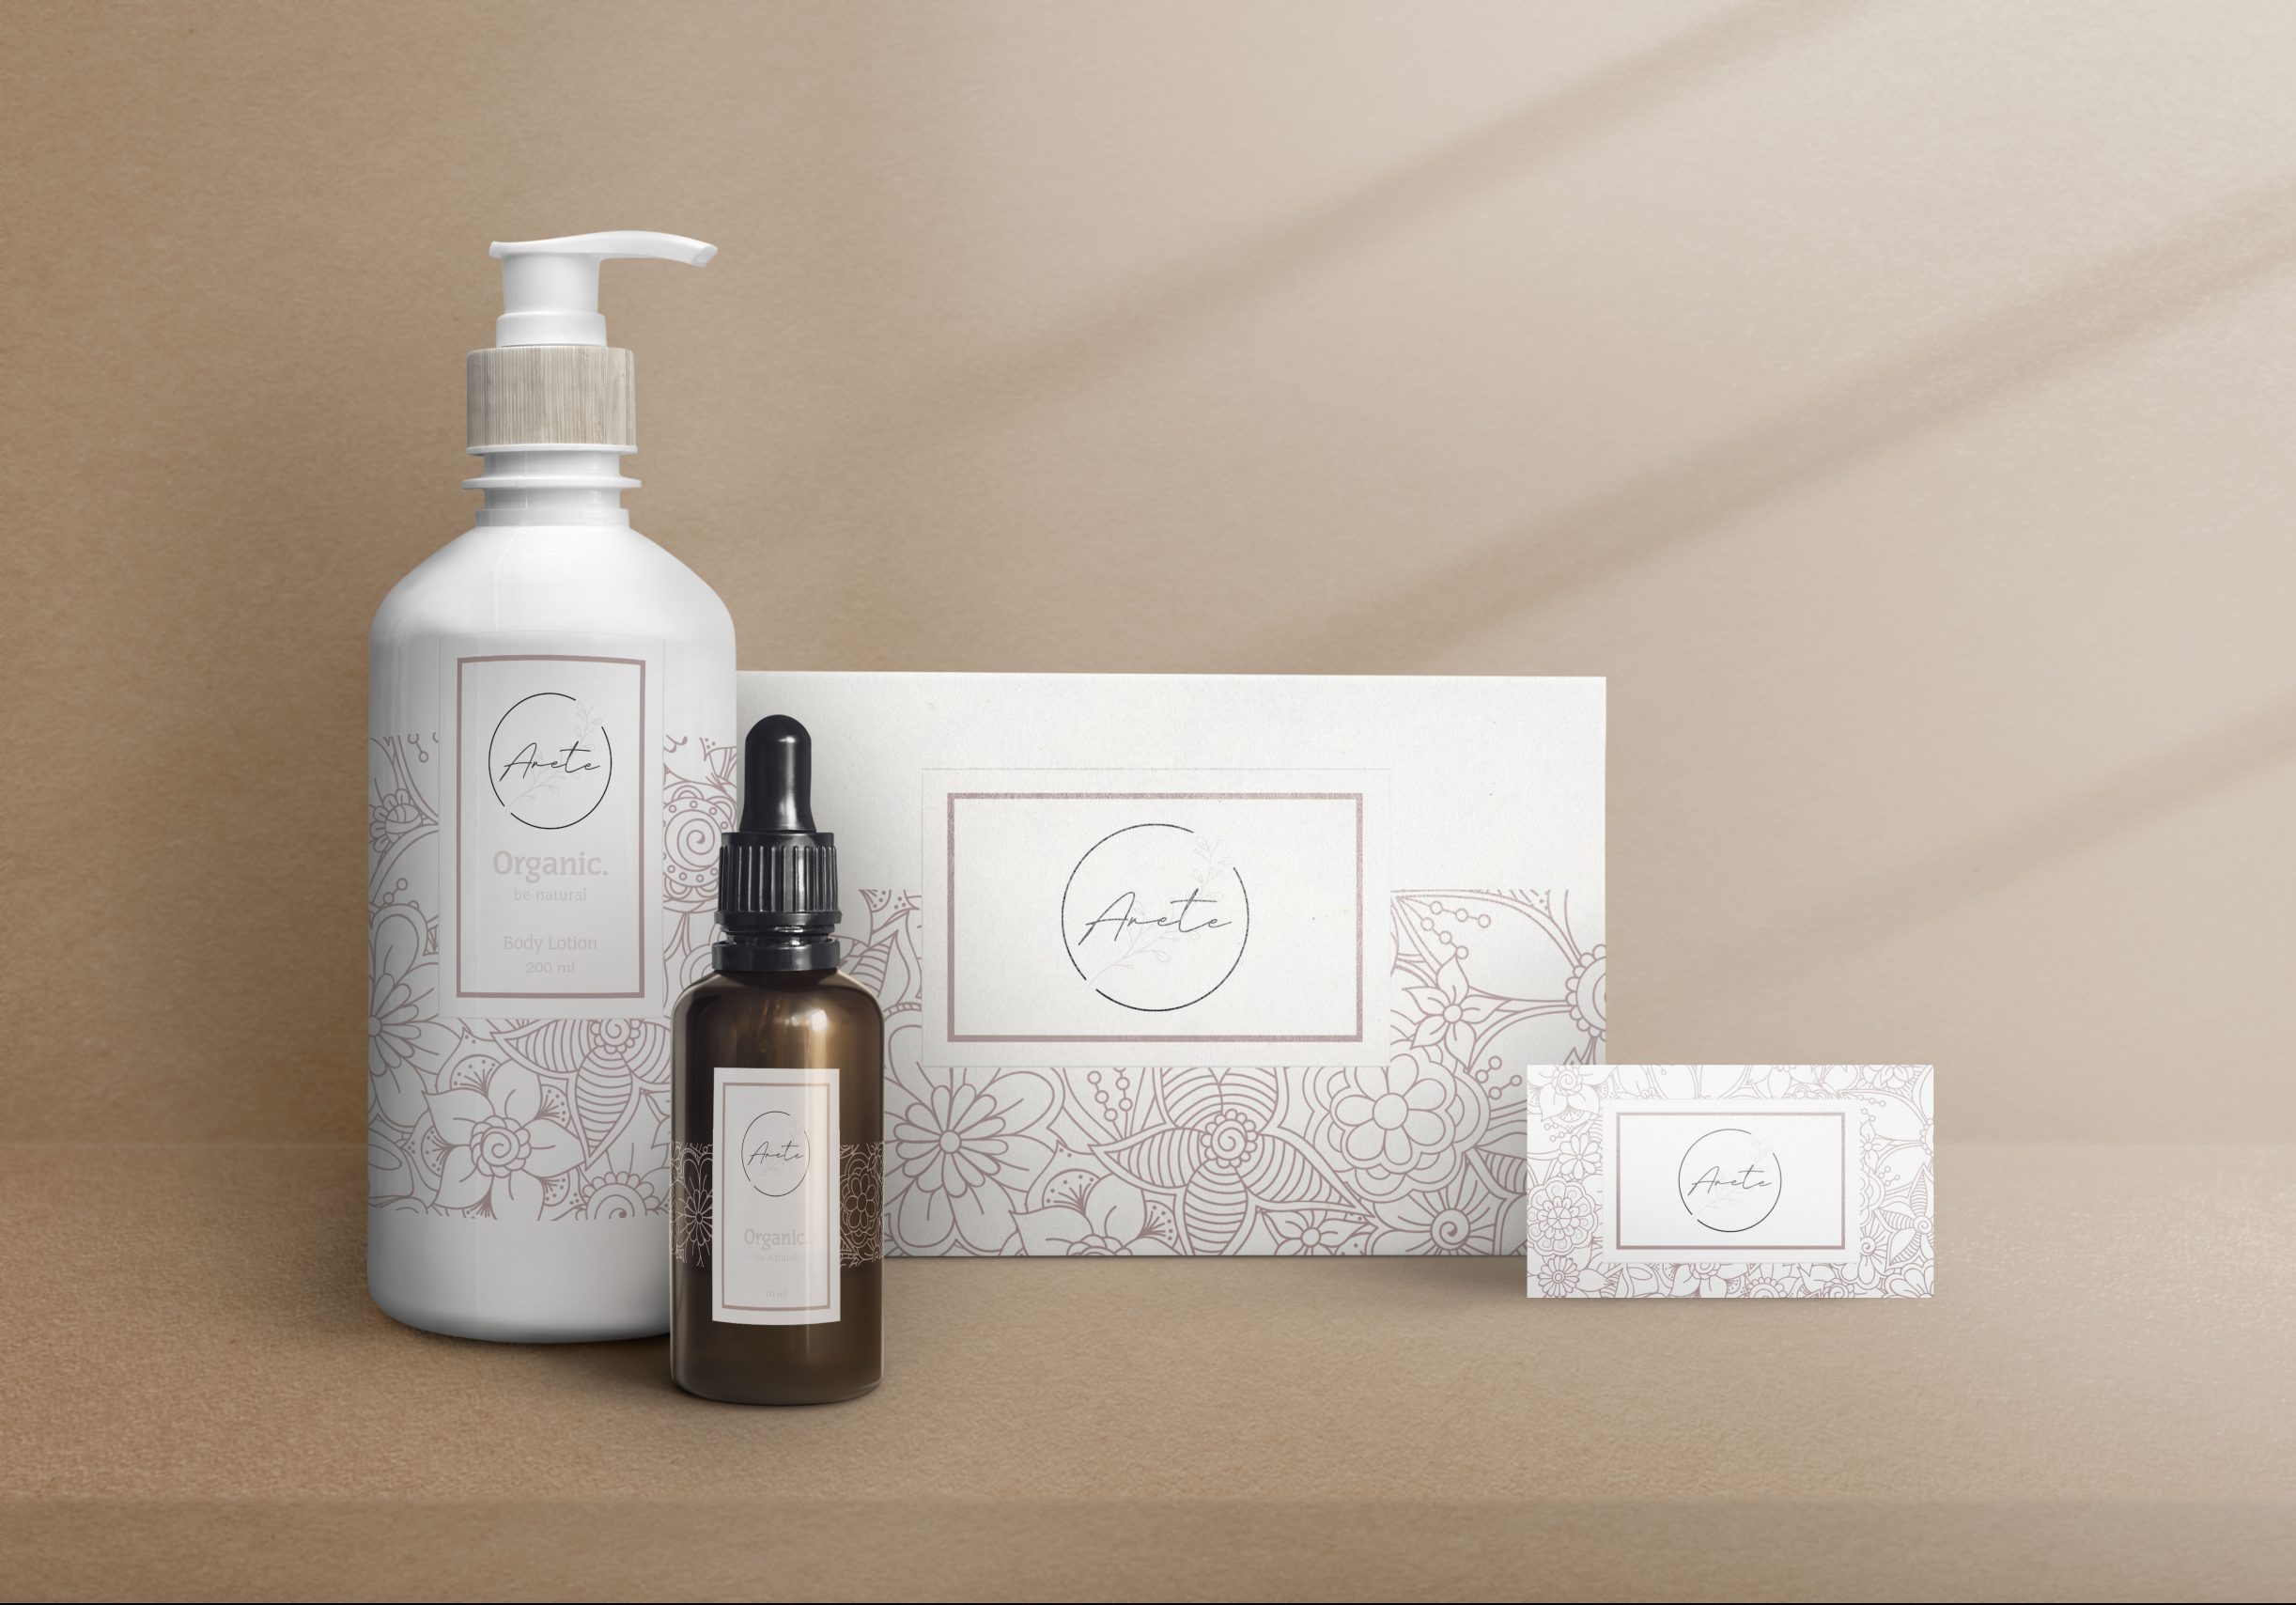 Arete beauty products & packaging